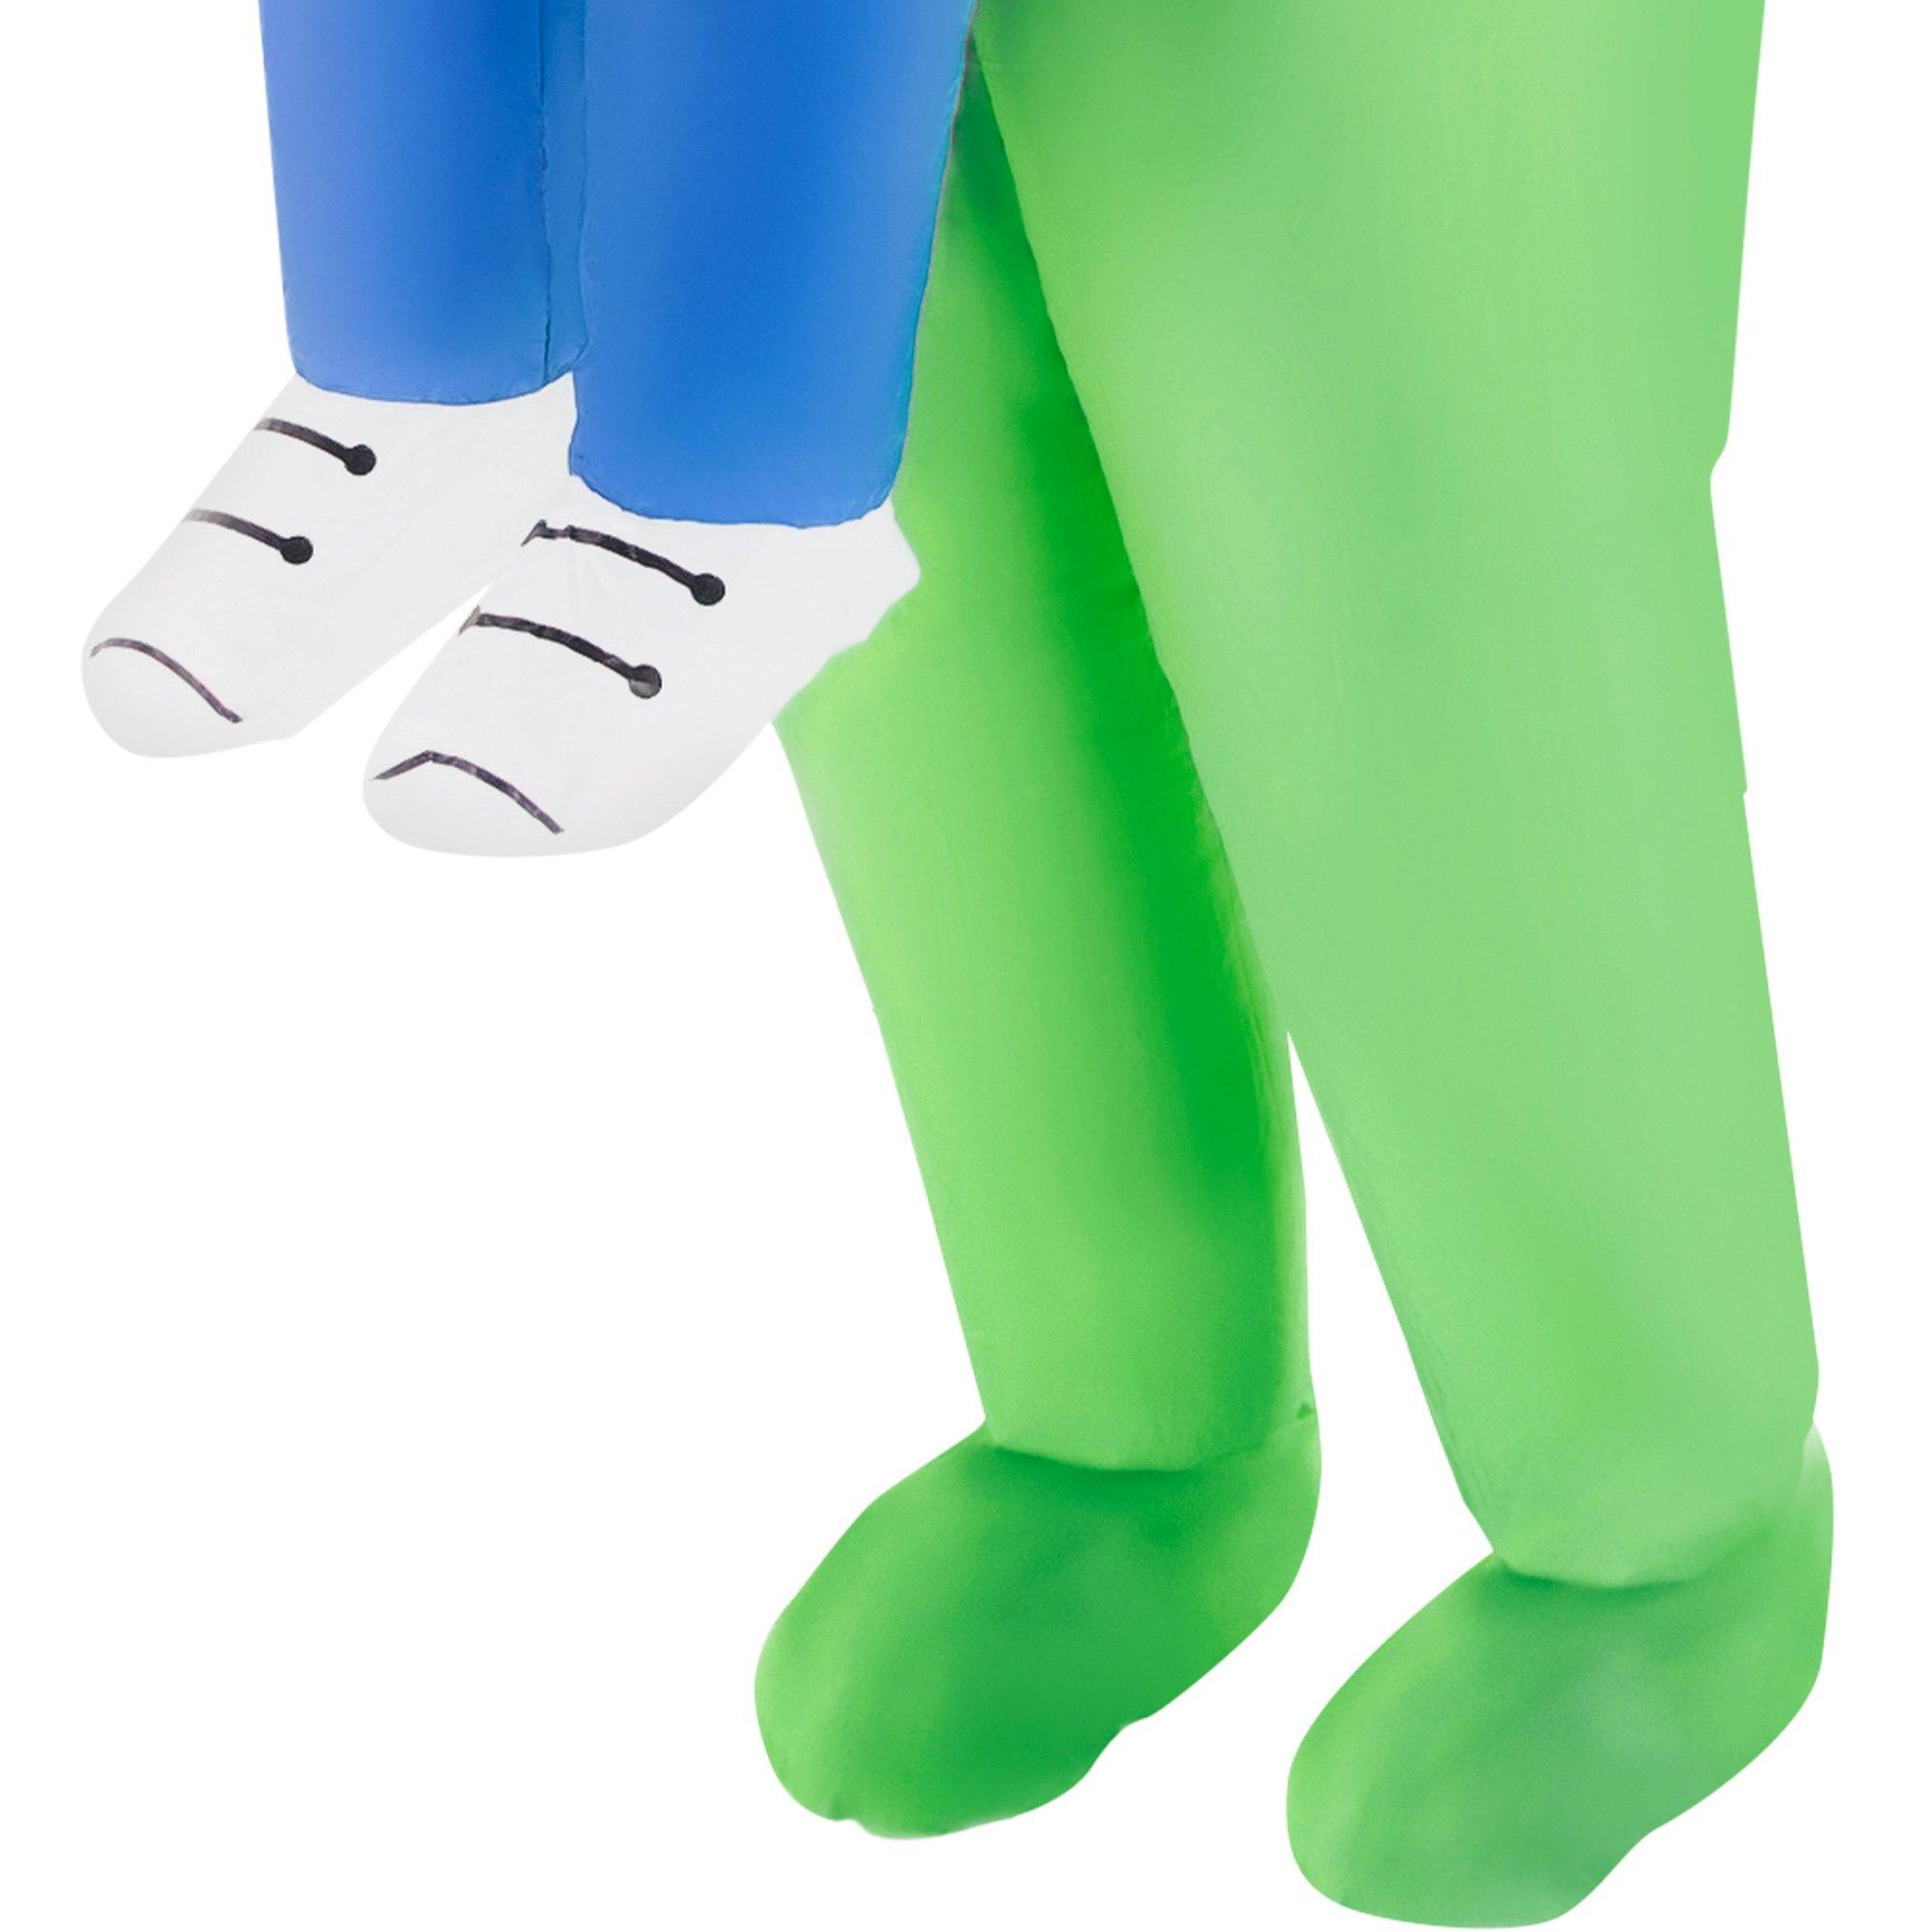 Adult Inflatable Alien Pick-Me-Up Costume